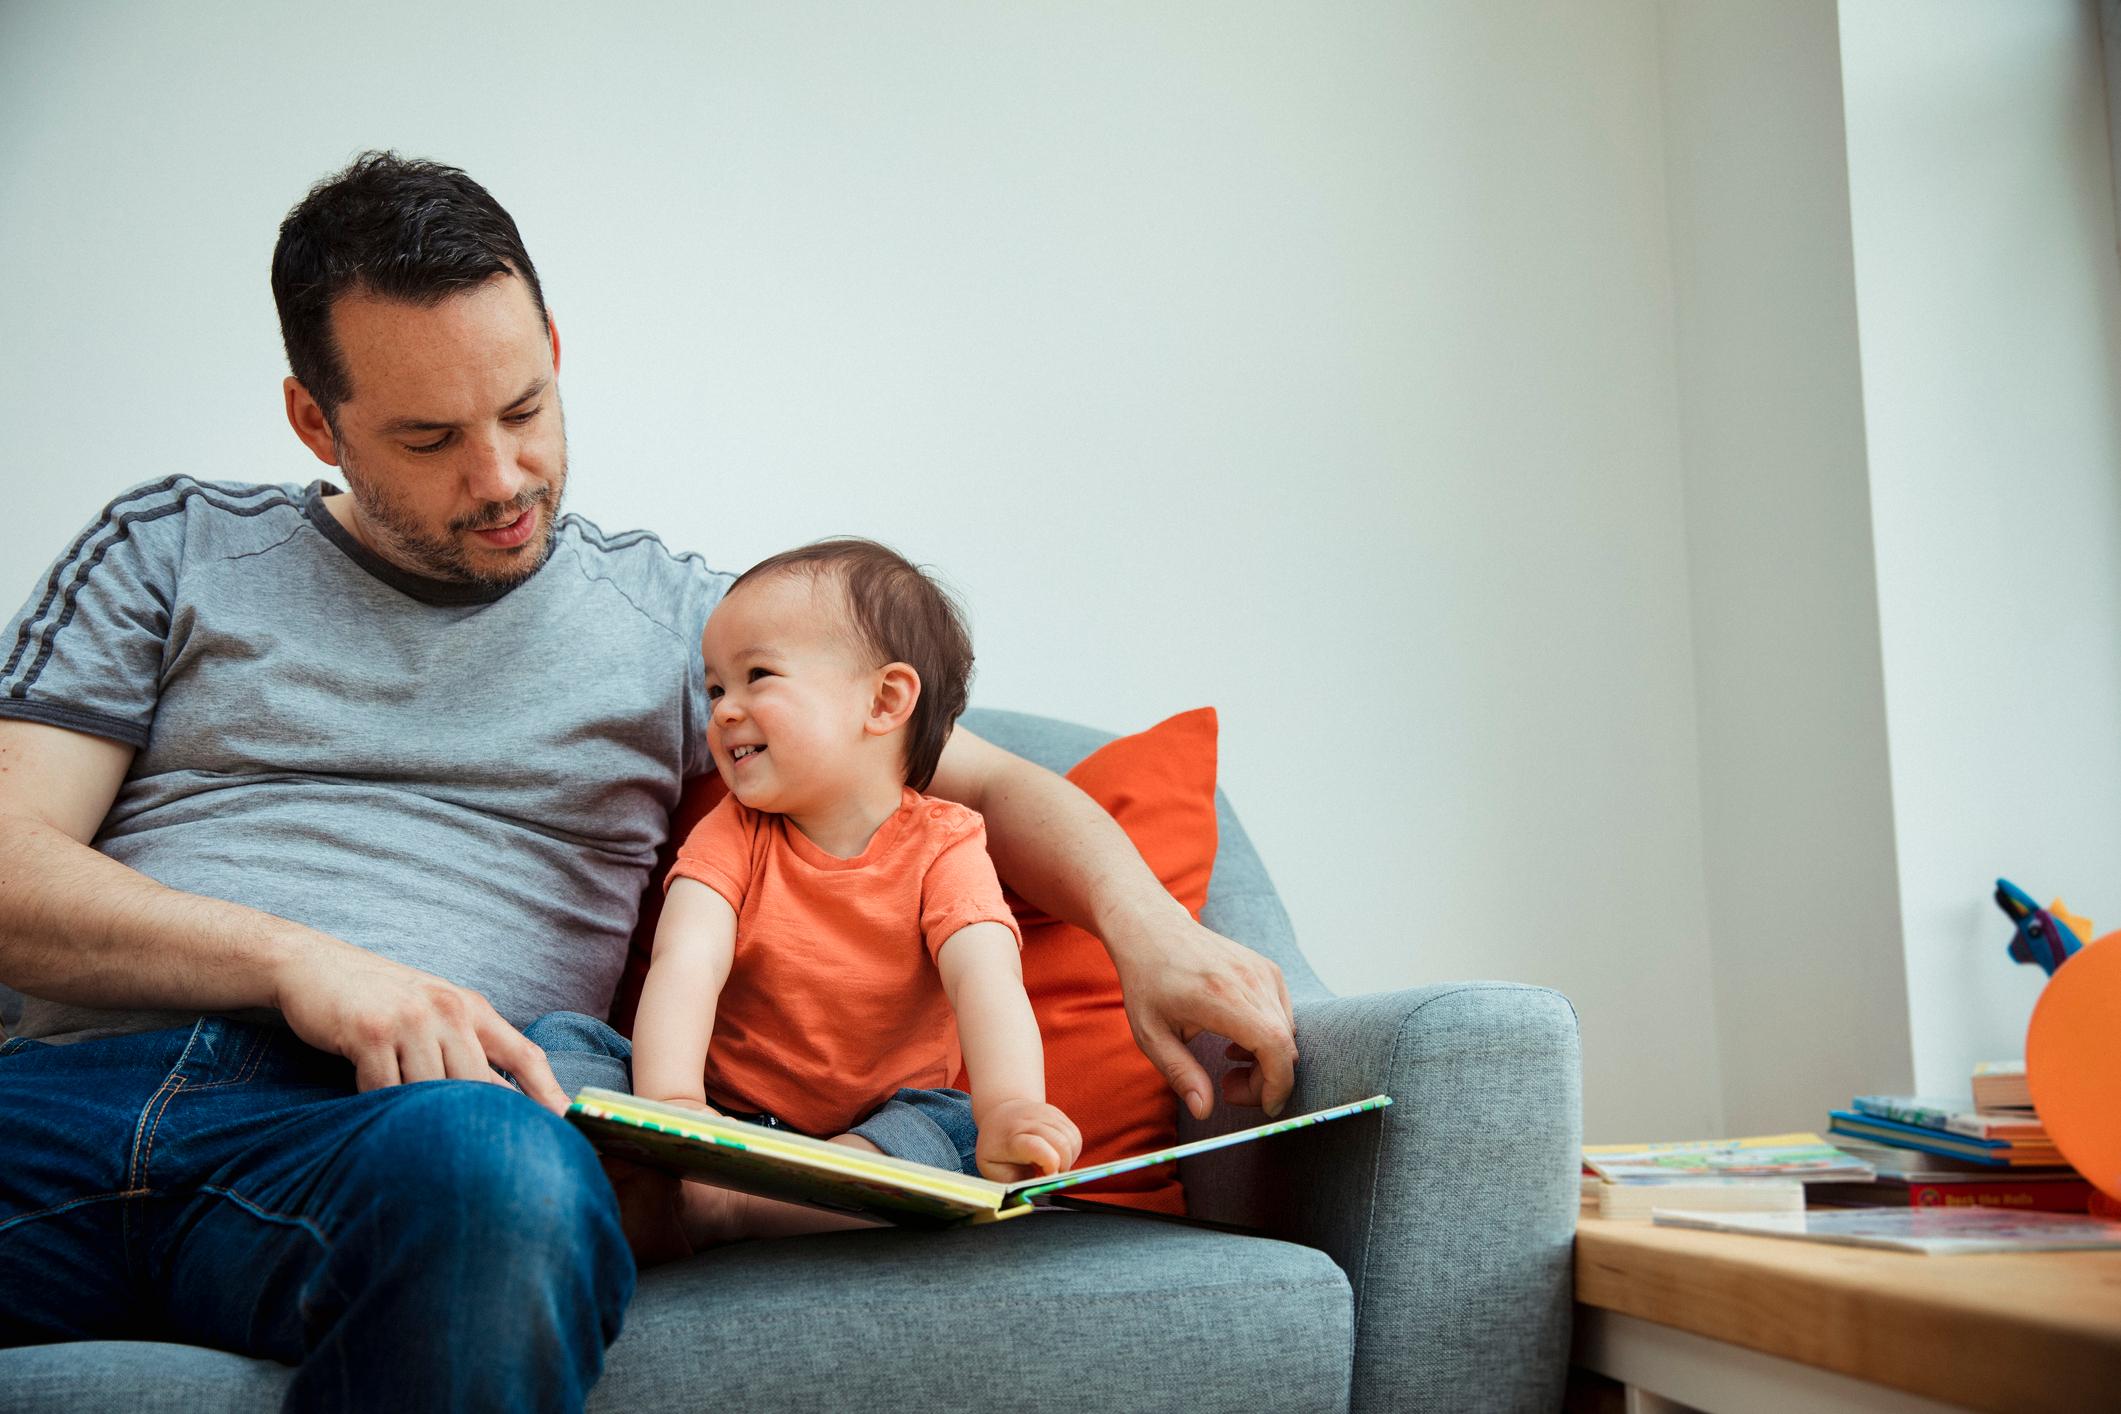 Father and child sat together reading and smiling.